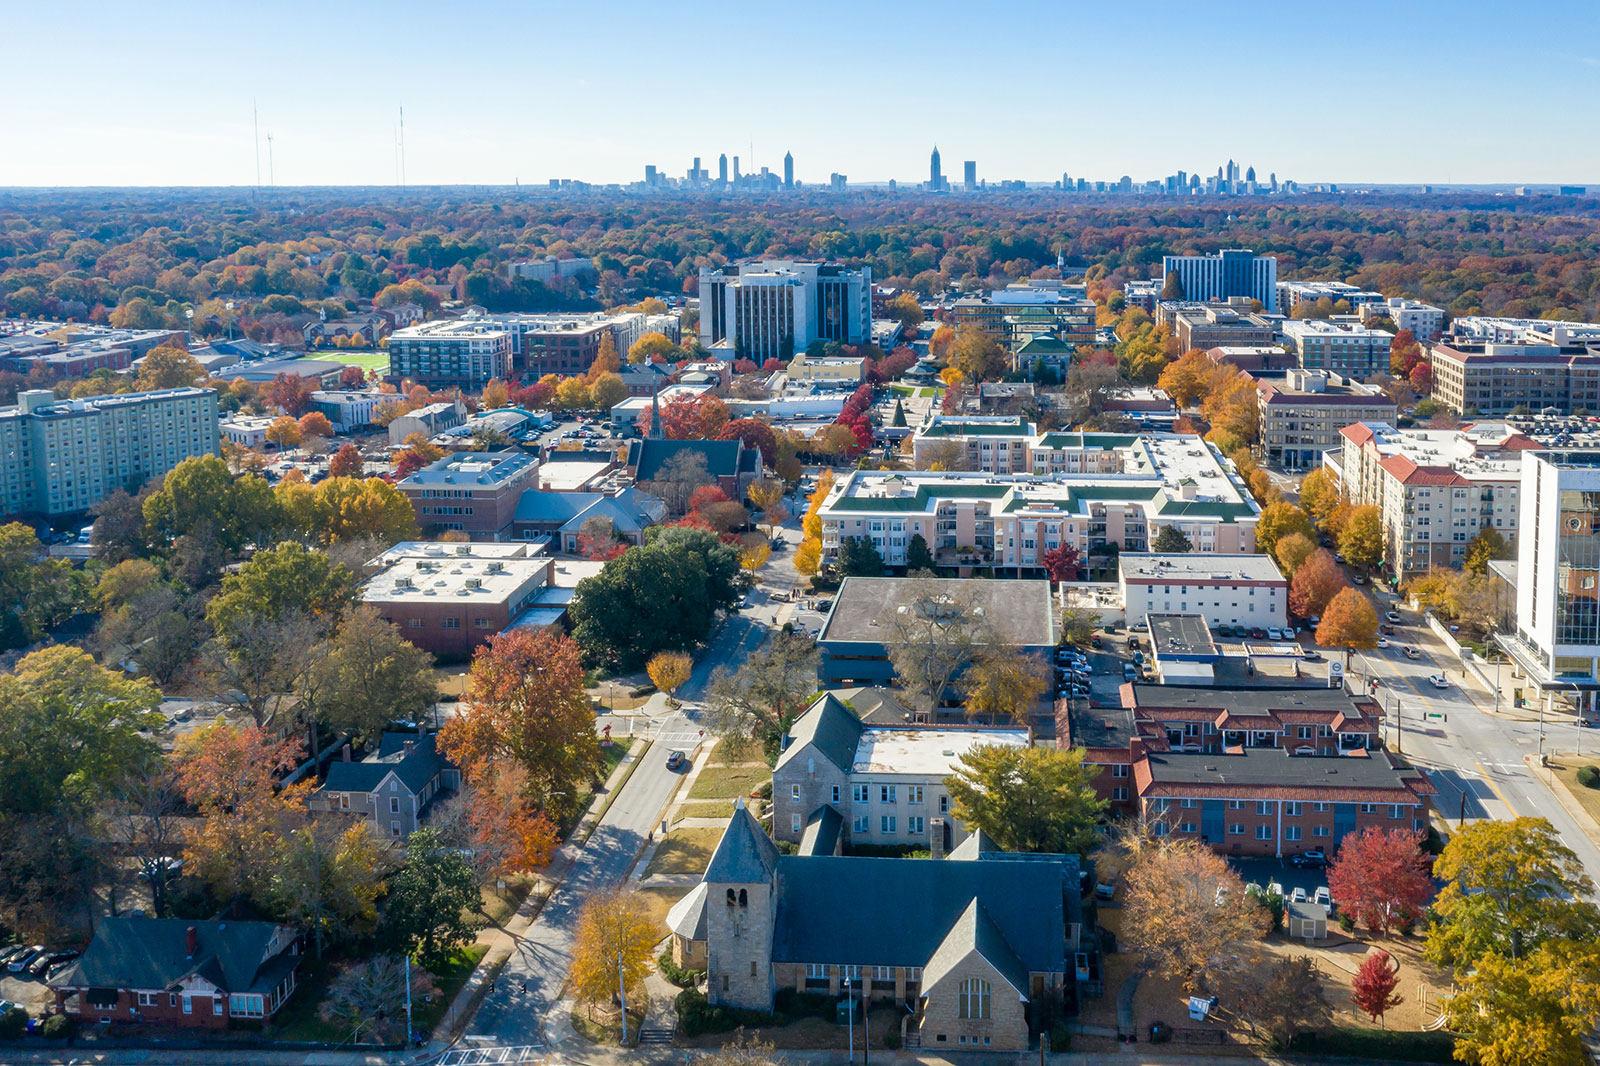 Aerial shot of Decatur, Georgia, location of the Williams Teusink real estate law firm, with Atlanta in the background.